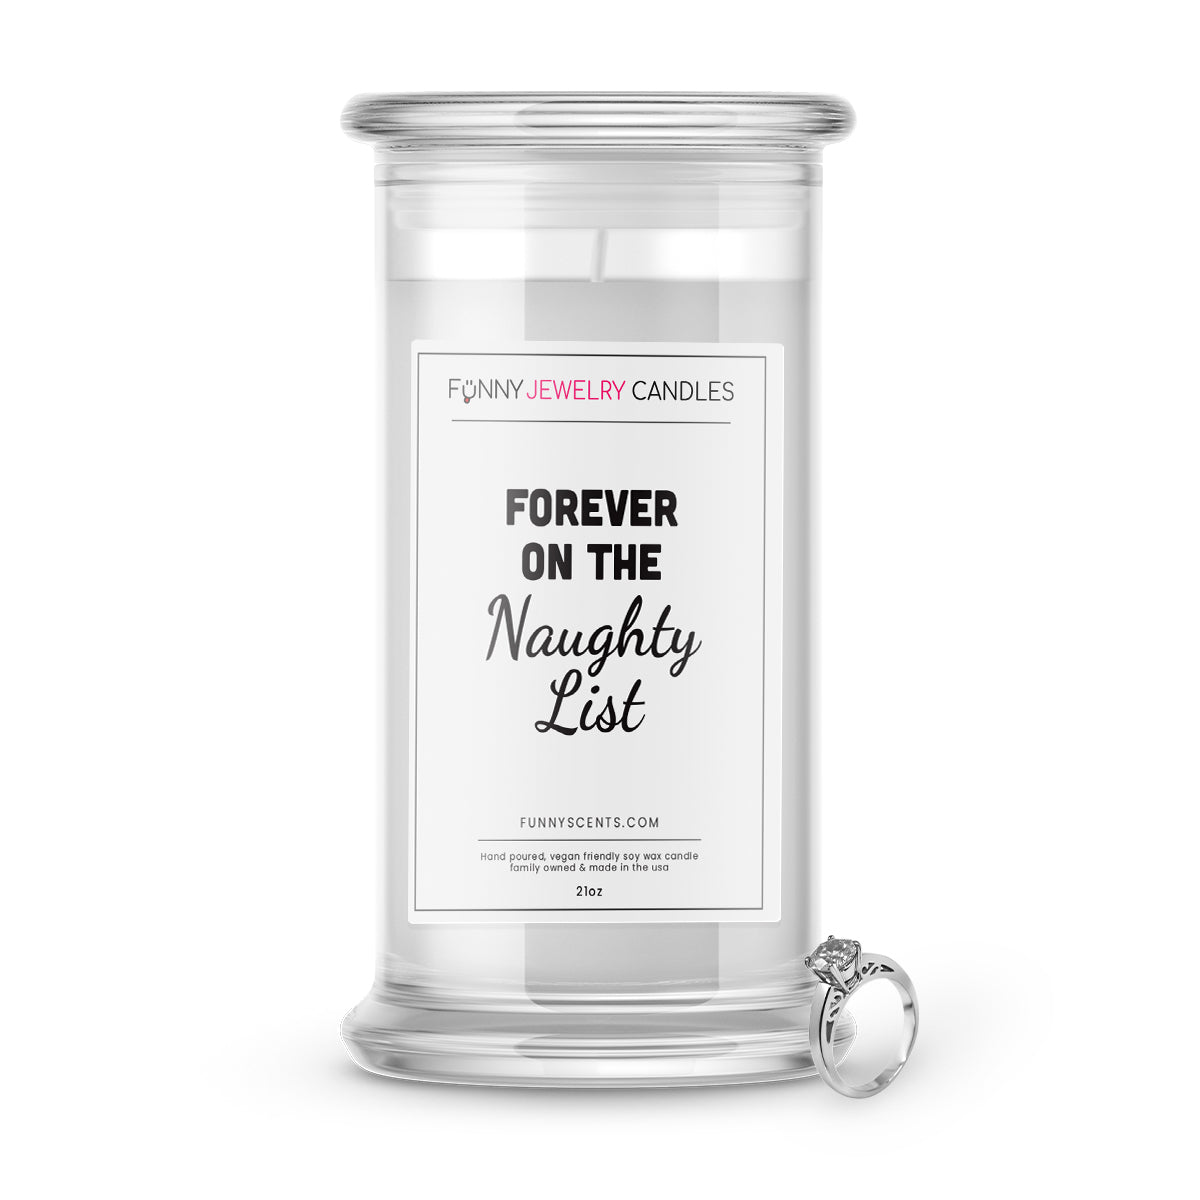 Forever On The Naughty List Jewelry Funny Candles